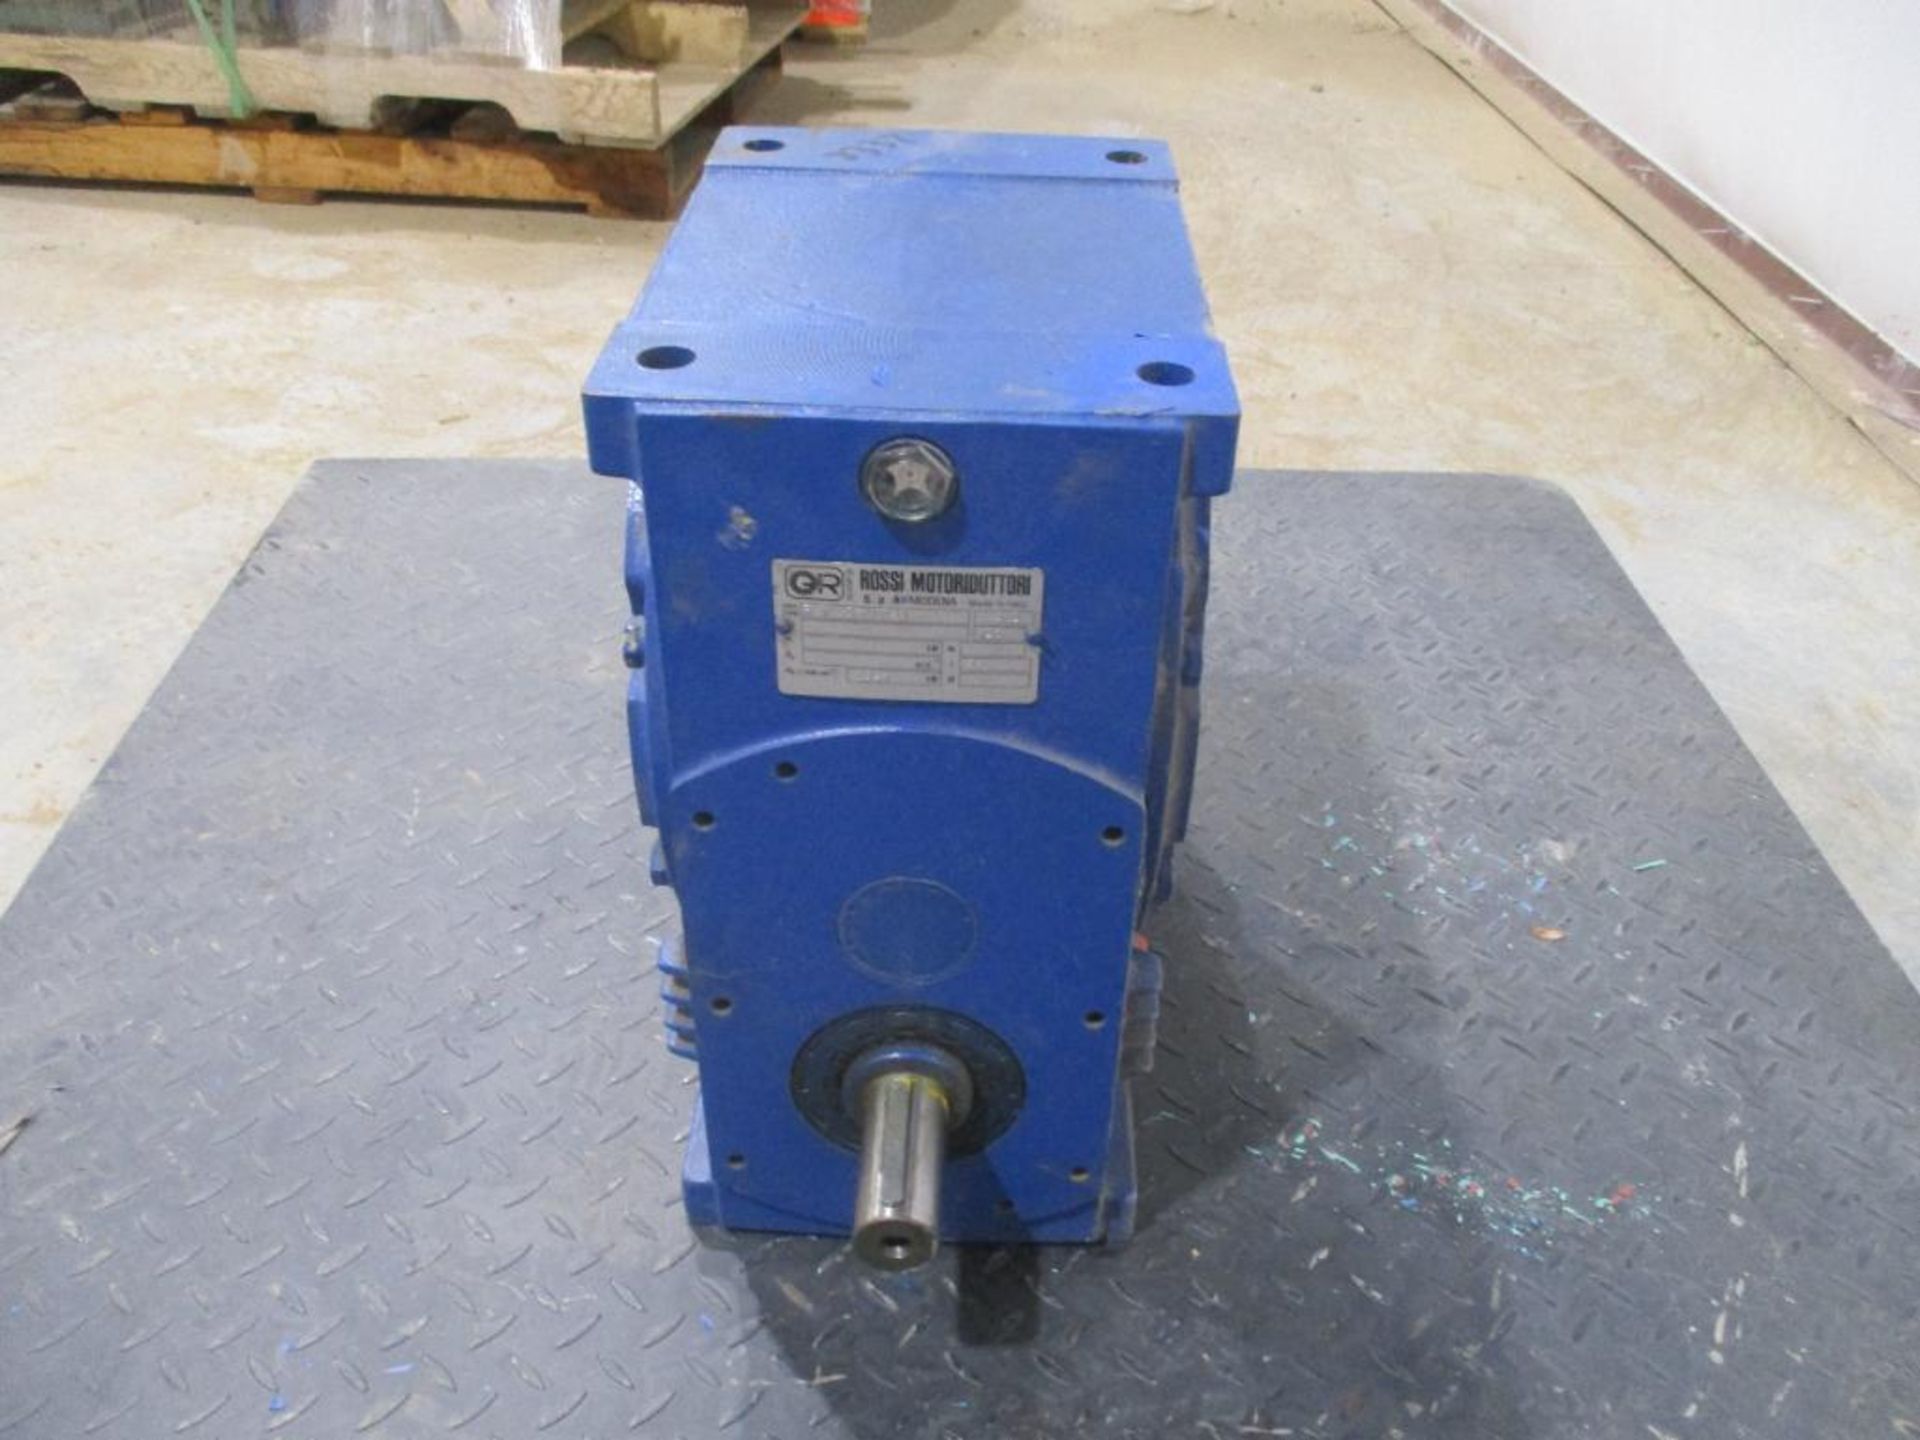 ROSSI MOTORIDUTTORI 32 RATIO REDUCER P/N RV160U02A, 279# lbs (There will be a $40 Rigging/Prep fee a - Image 2 of 5